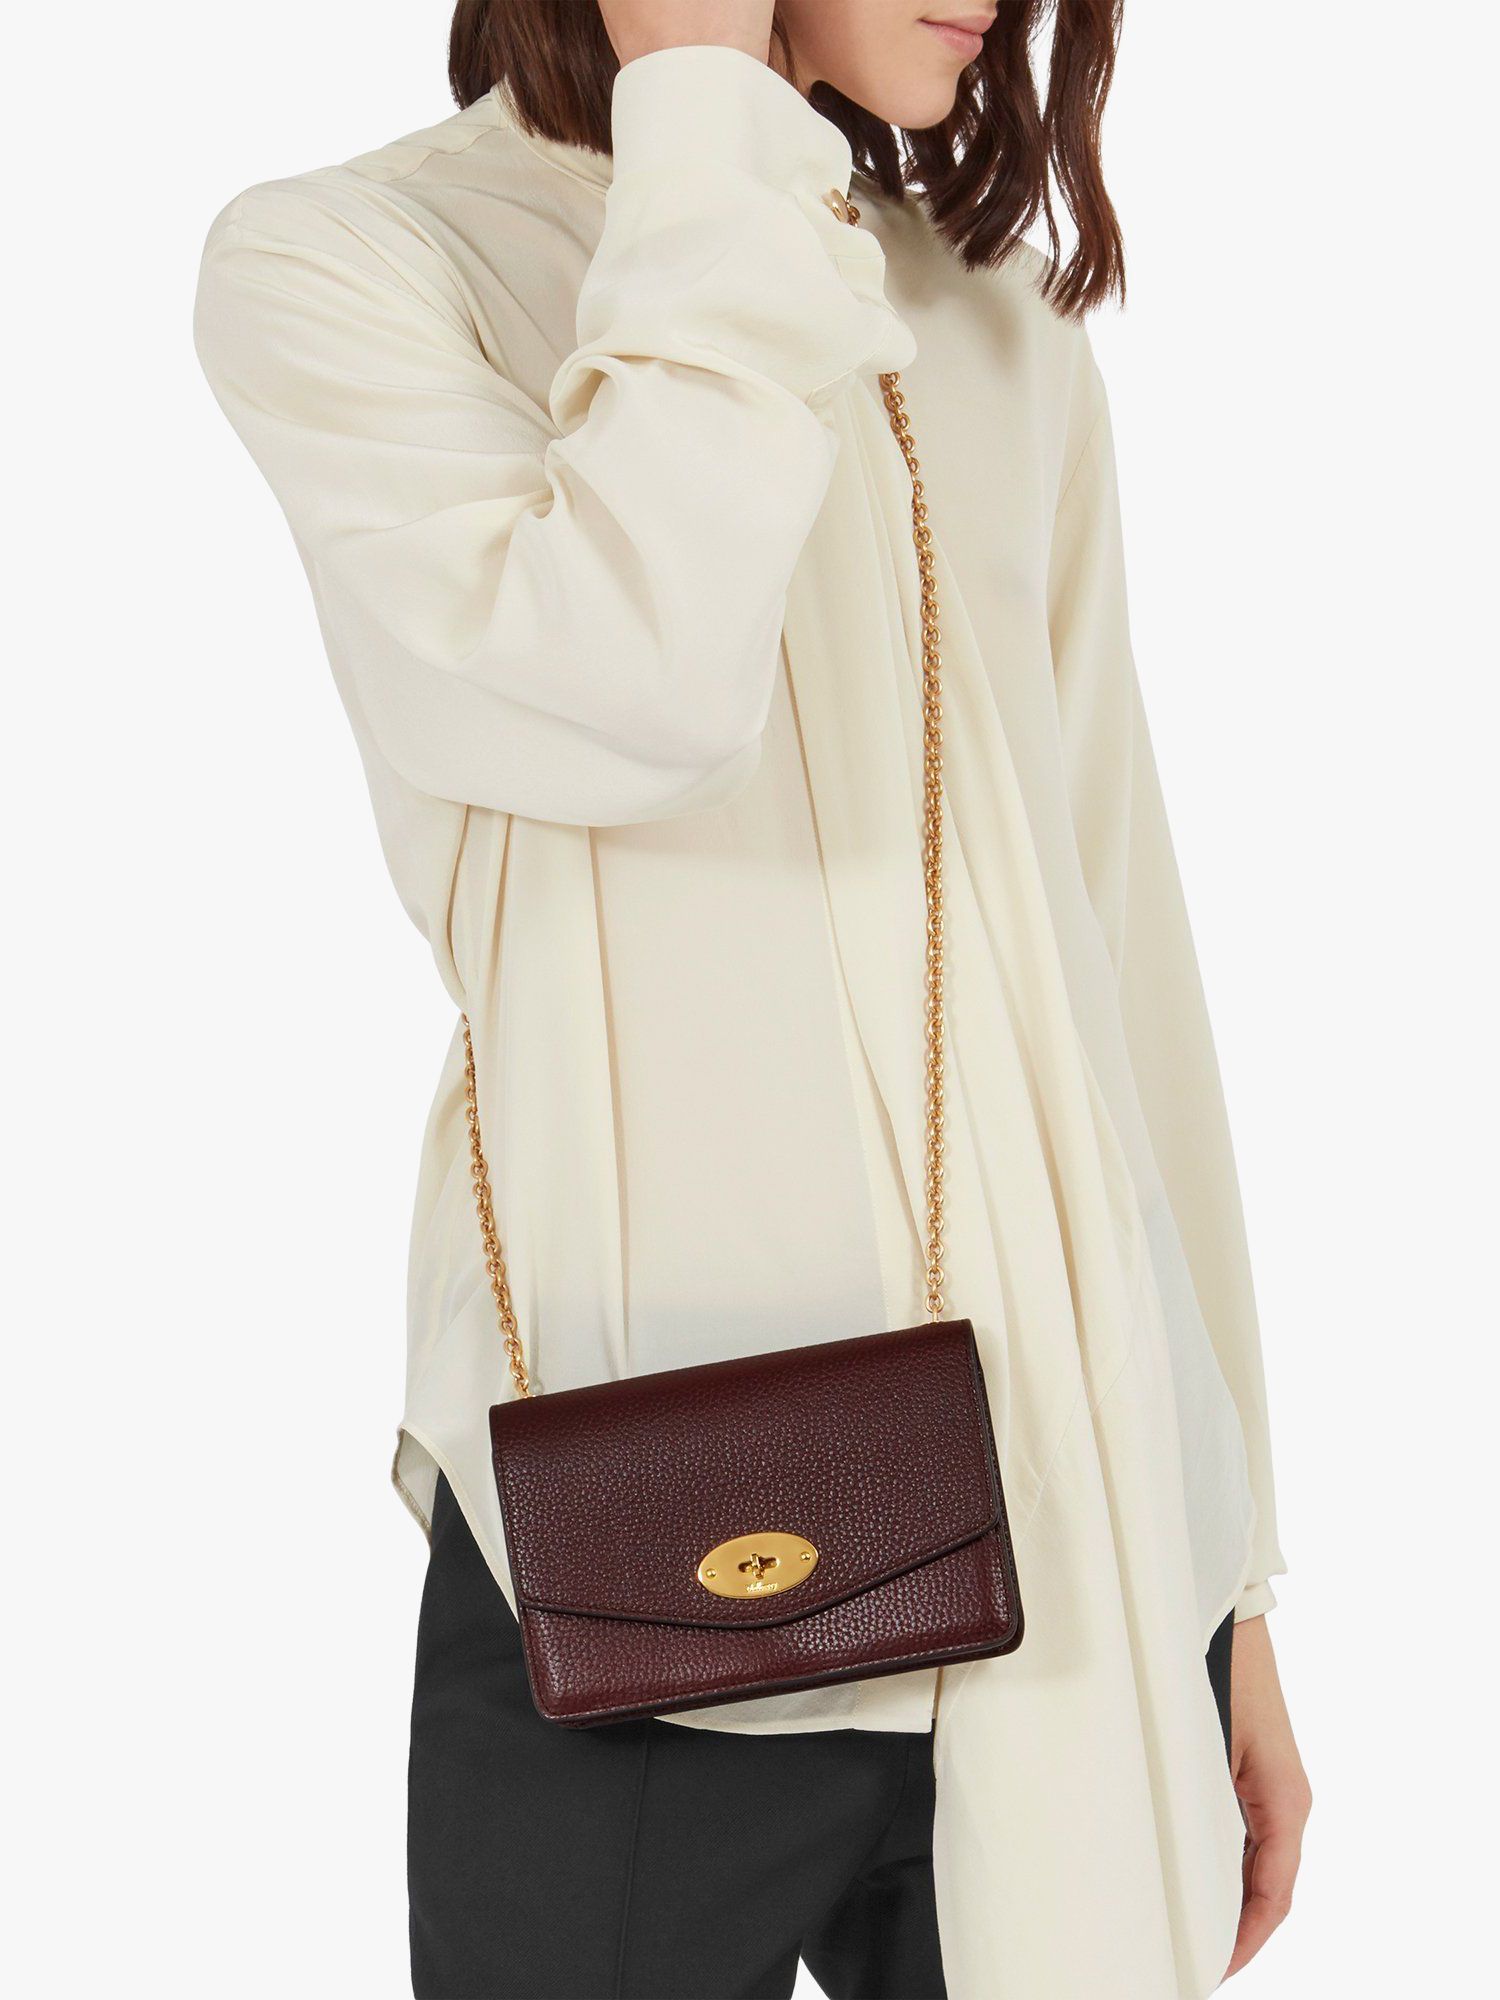 Mulberry Small Darley Heavy Grain Leather Cross Body Bag, Mulberry Green at  John Lewis & Partners